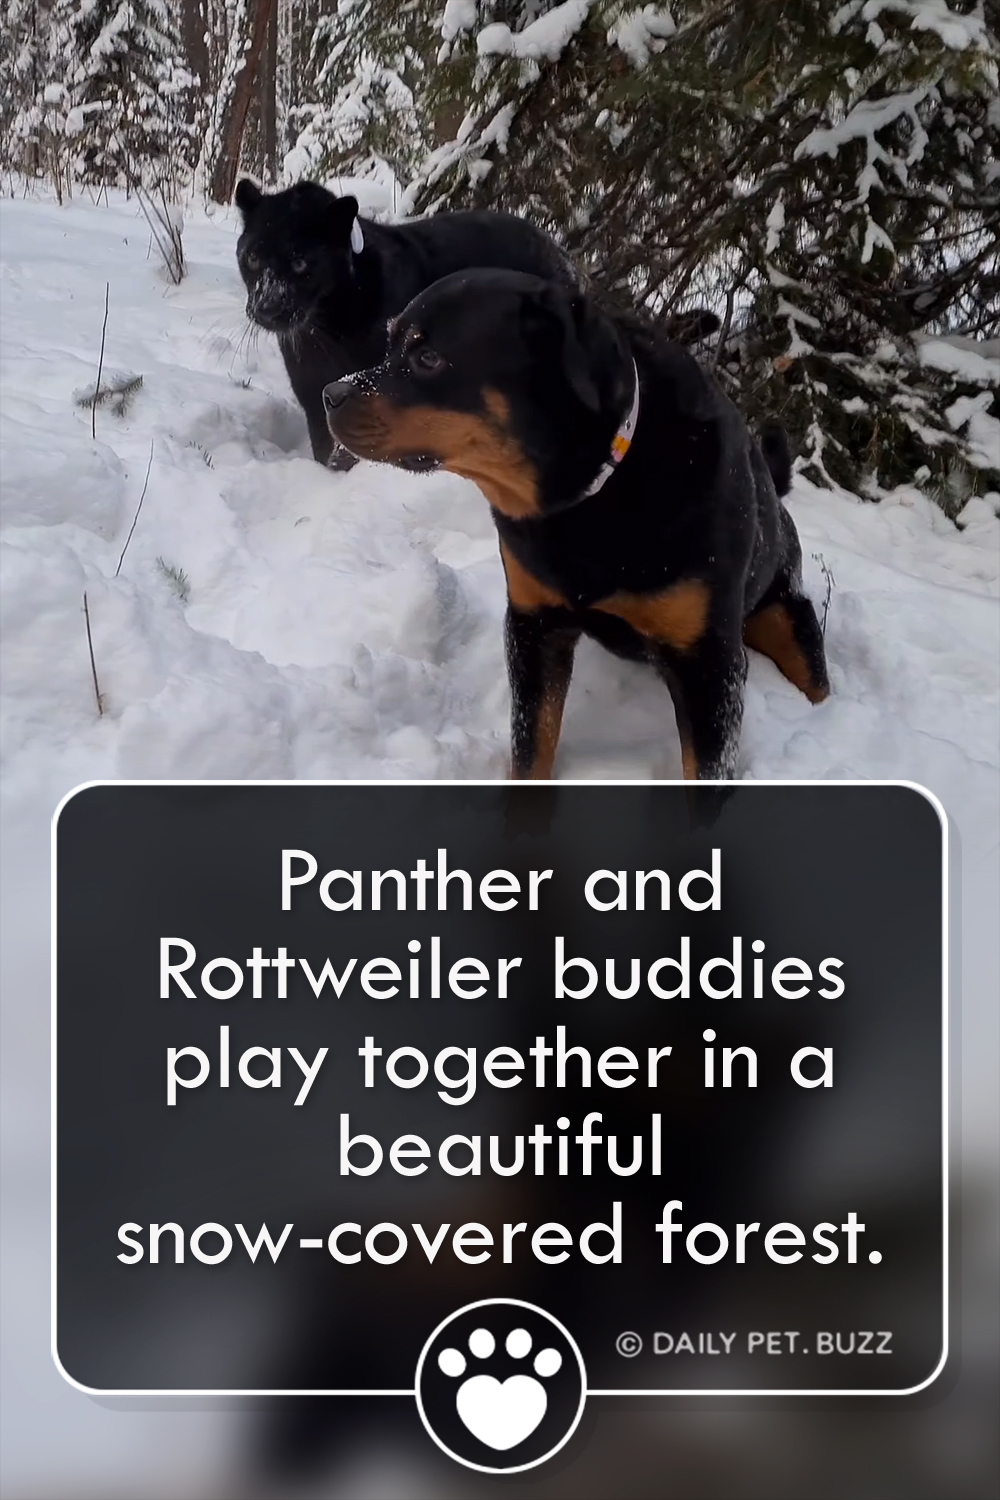 Panther and Rottweiler buddies play together in a beautiful snow-covered forest.